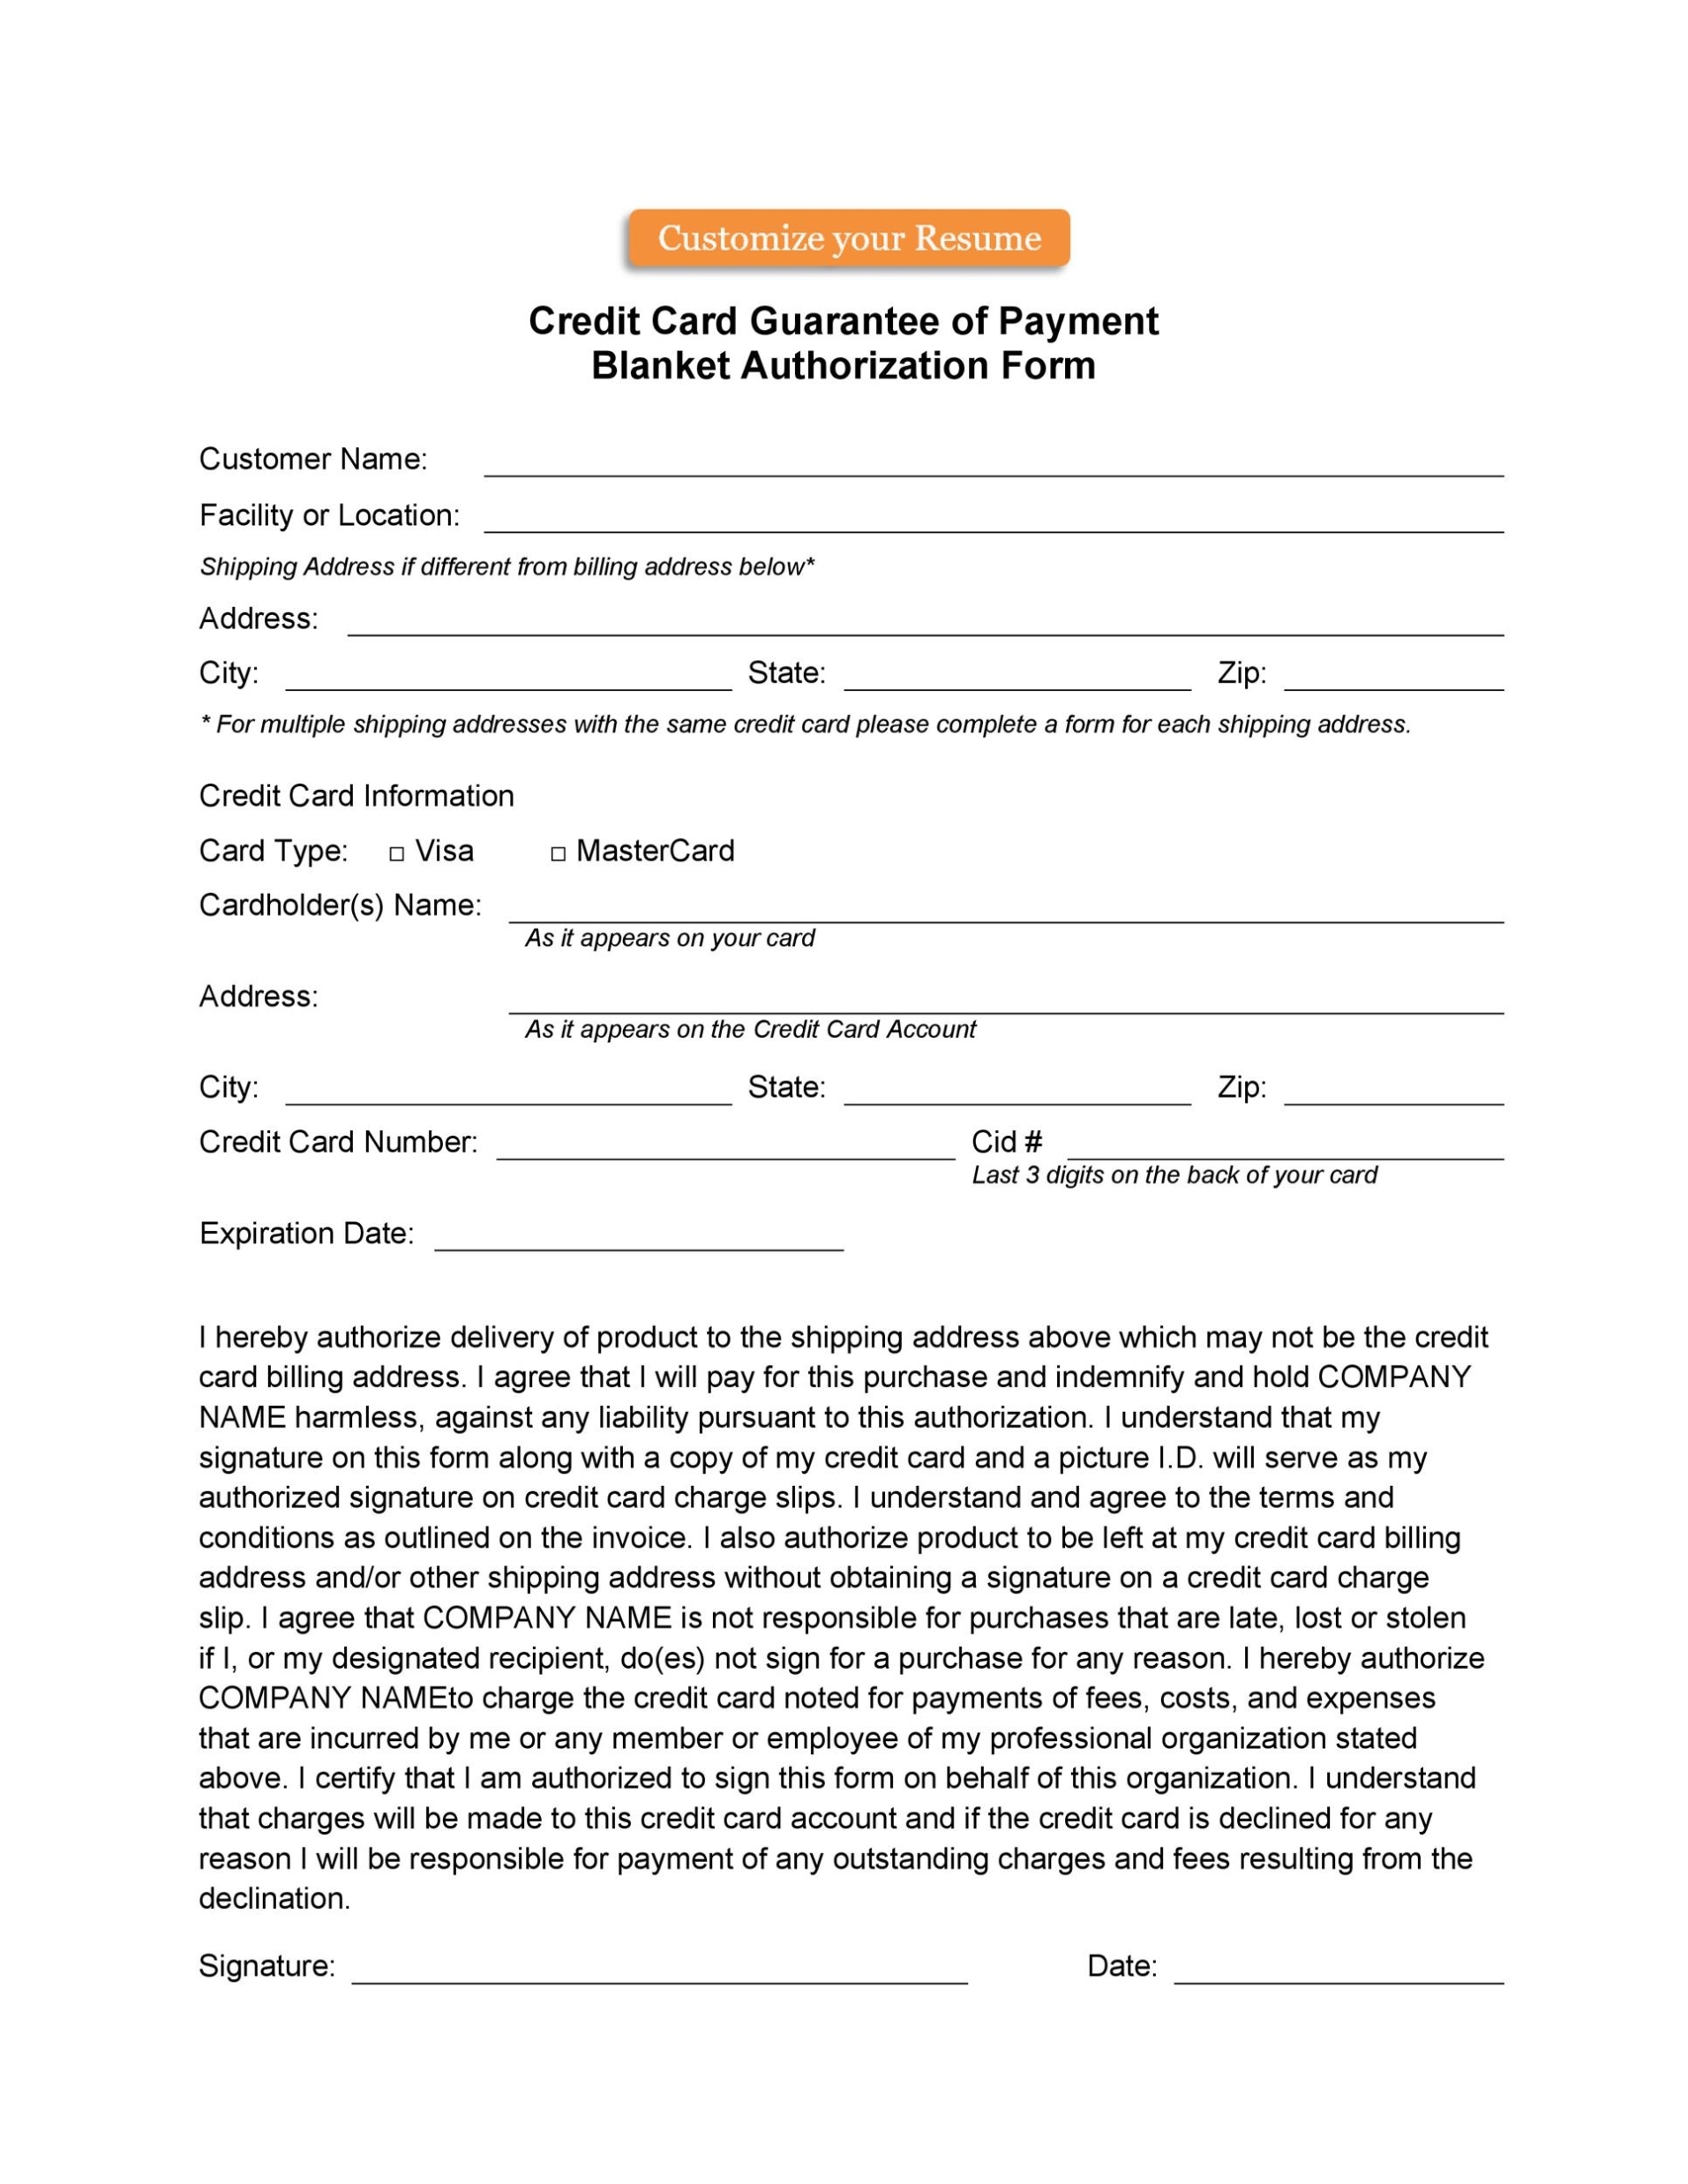 Credit Card Billing Authorization Form Template - Professional Sample Template With Credit Card Billing Authorization Form Template